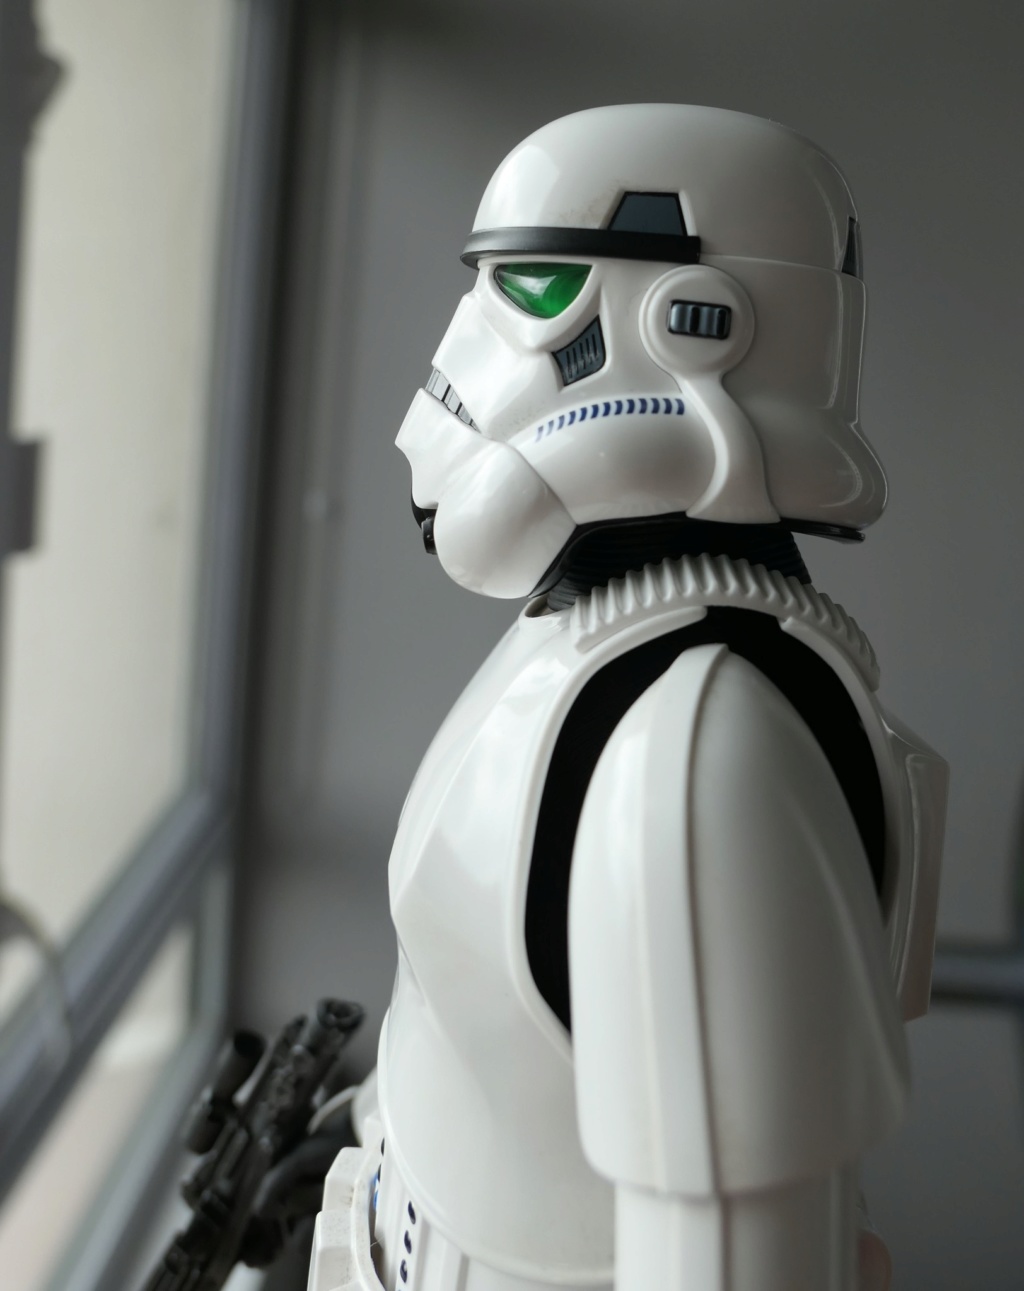 Stormtrooper - NEW PRODUCT: HOT TOYS: STAR WARS STORMTROOPER (DELUXE VERSION) 1/6TH SCALE COLLECTIBLE FIGURE 2h6slc10